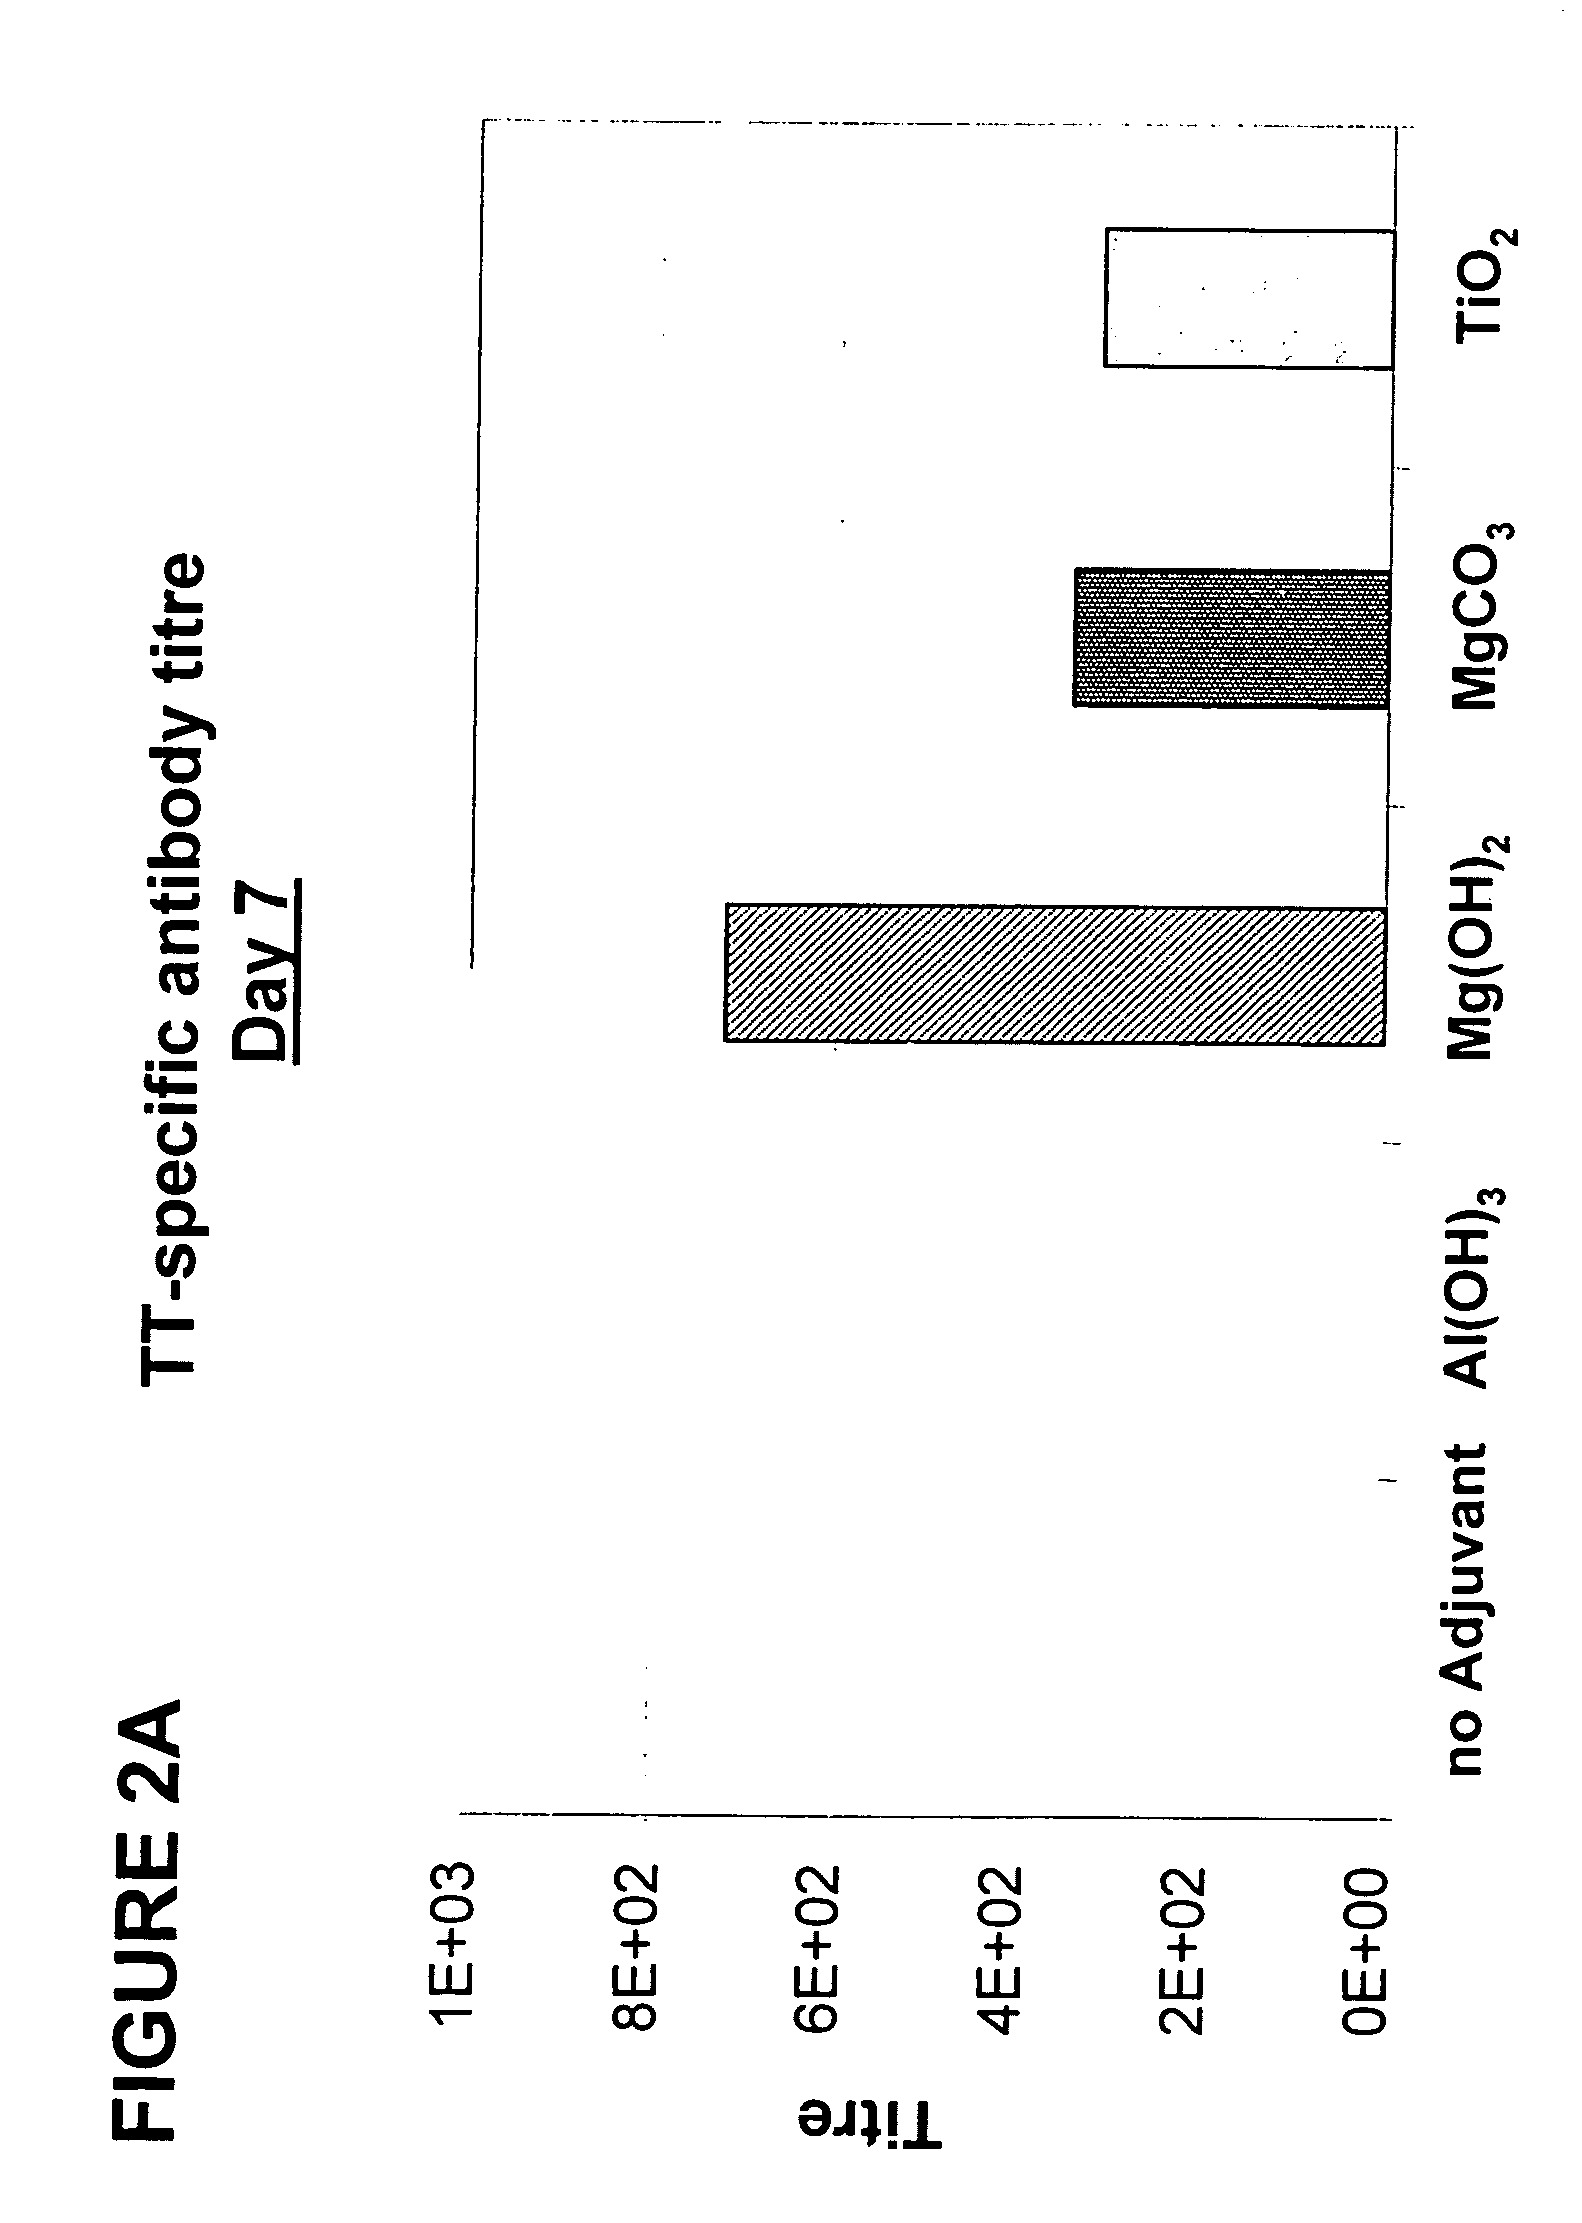 Novel parenteral vaccine formulations and uses thereof